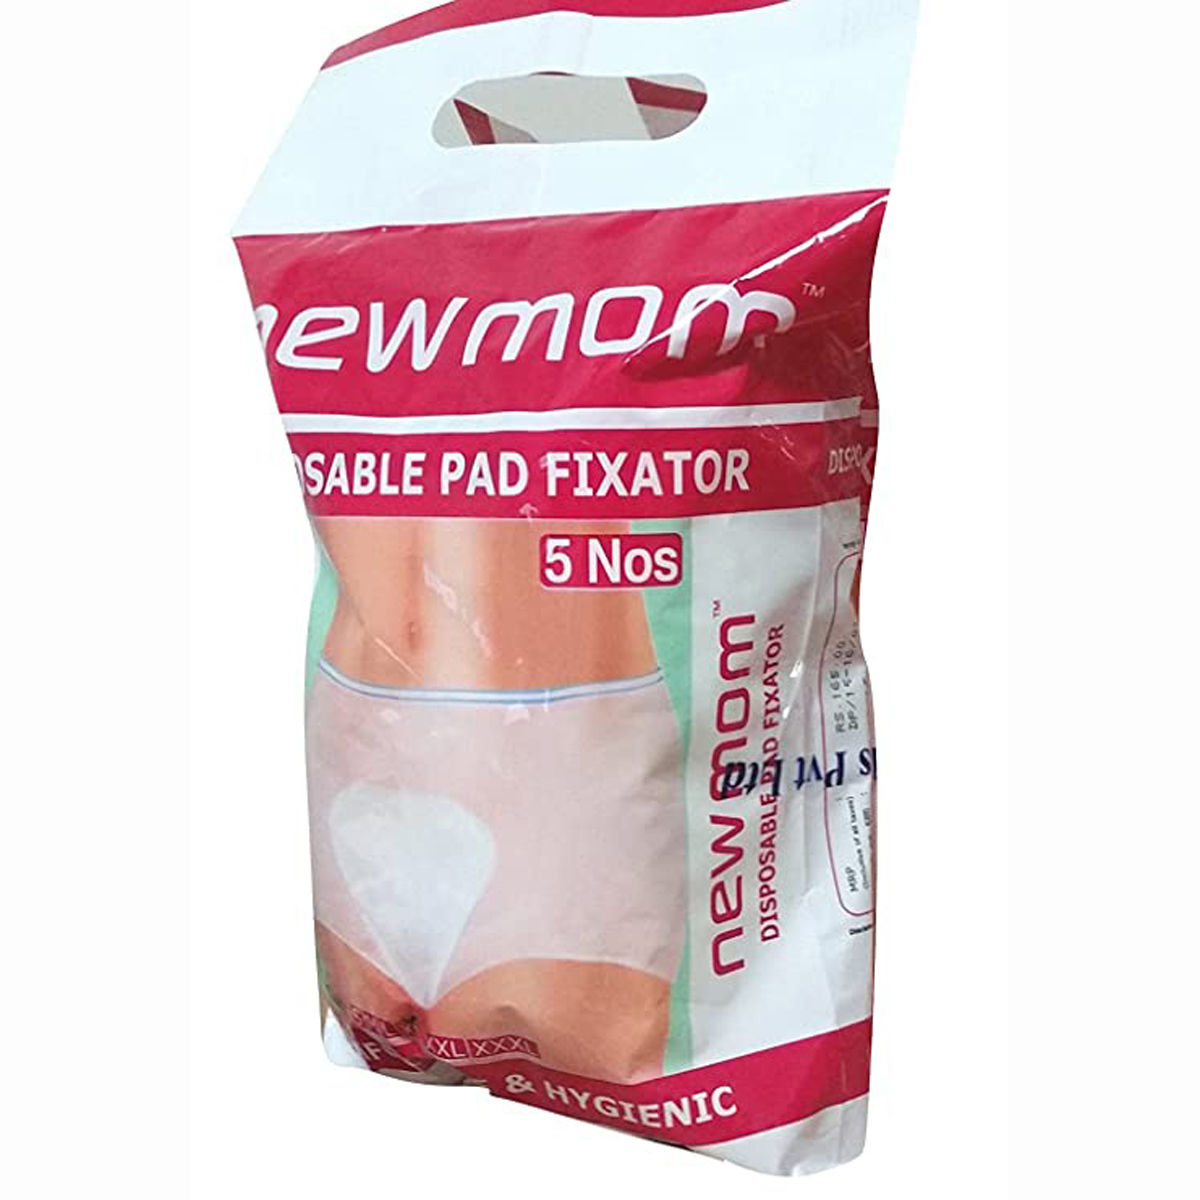 Pregnancy, 1 New Mom Disposable Pad Fixator Disposable panty